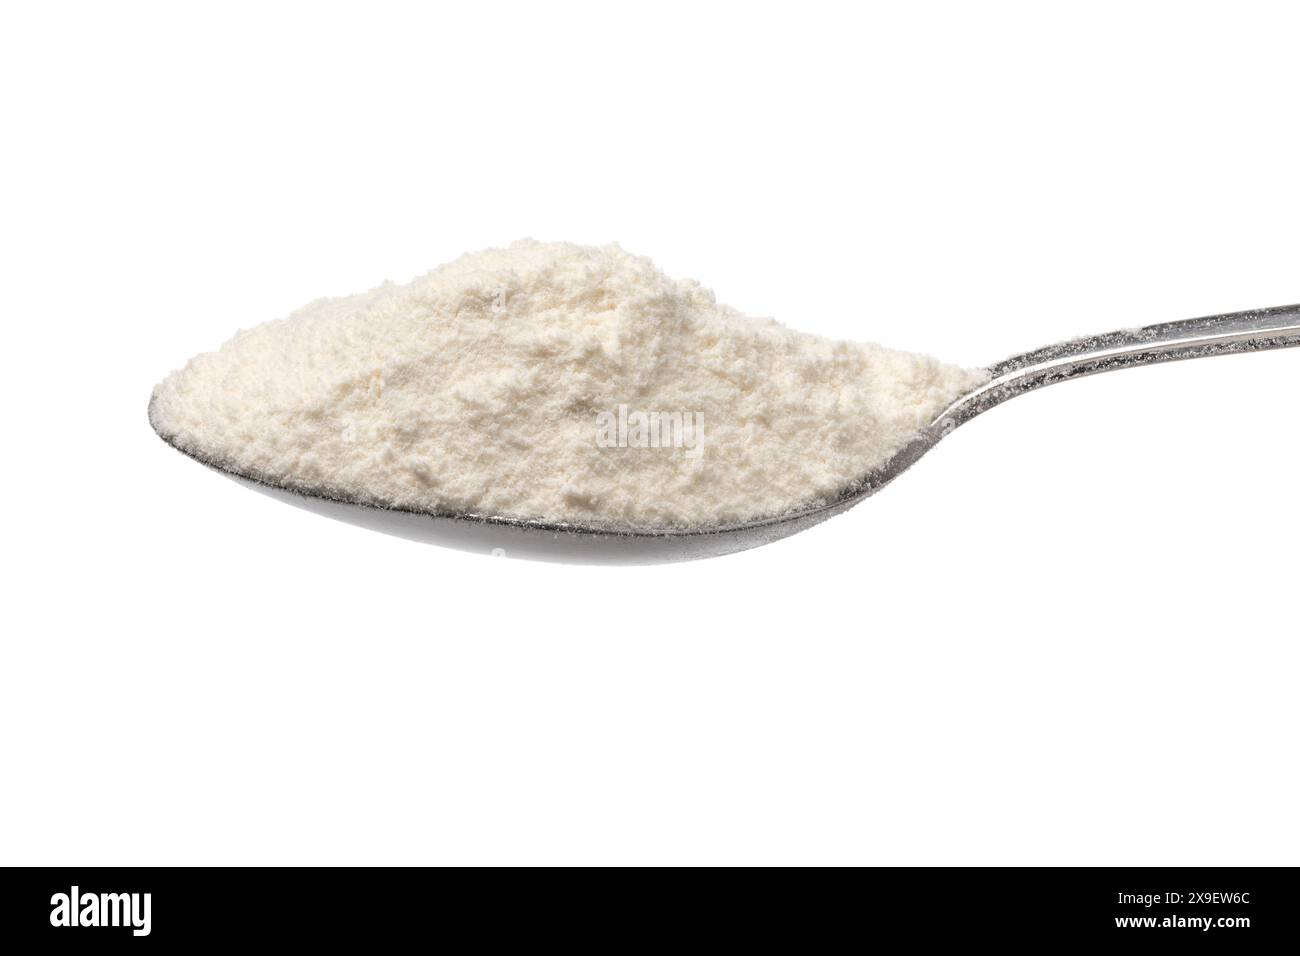 Metal spoon with wheat flour on white background close up Stock Photo